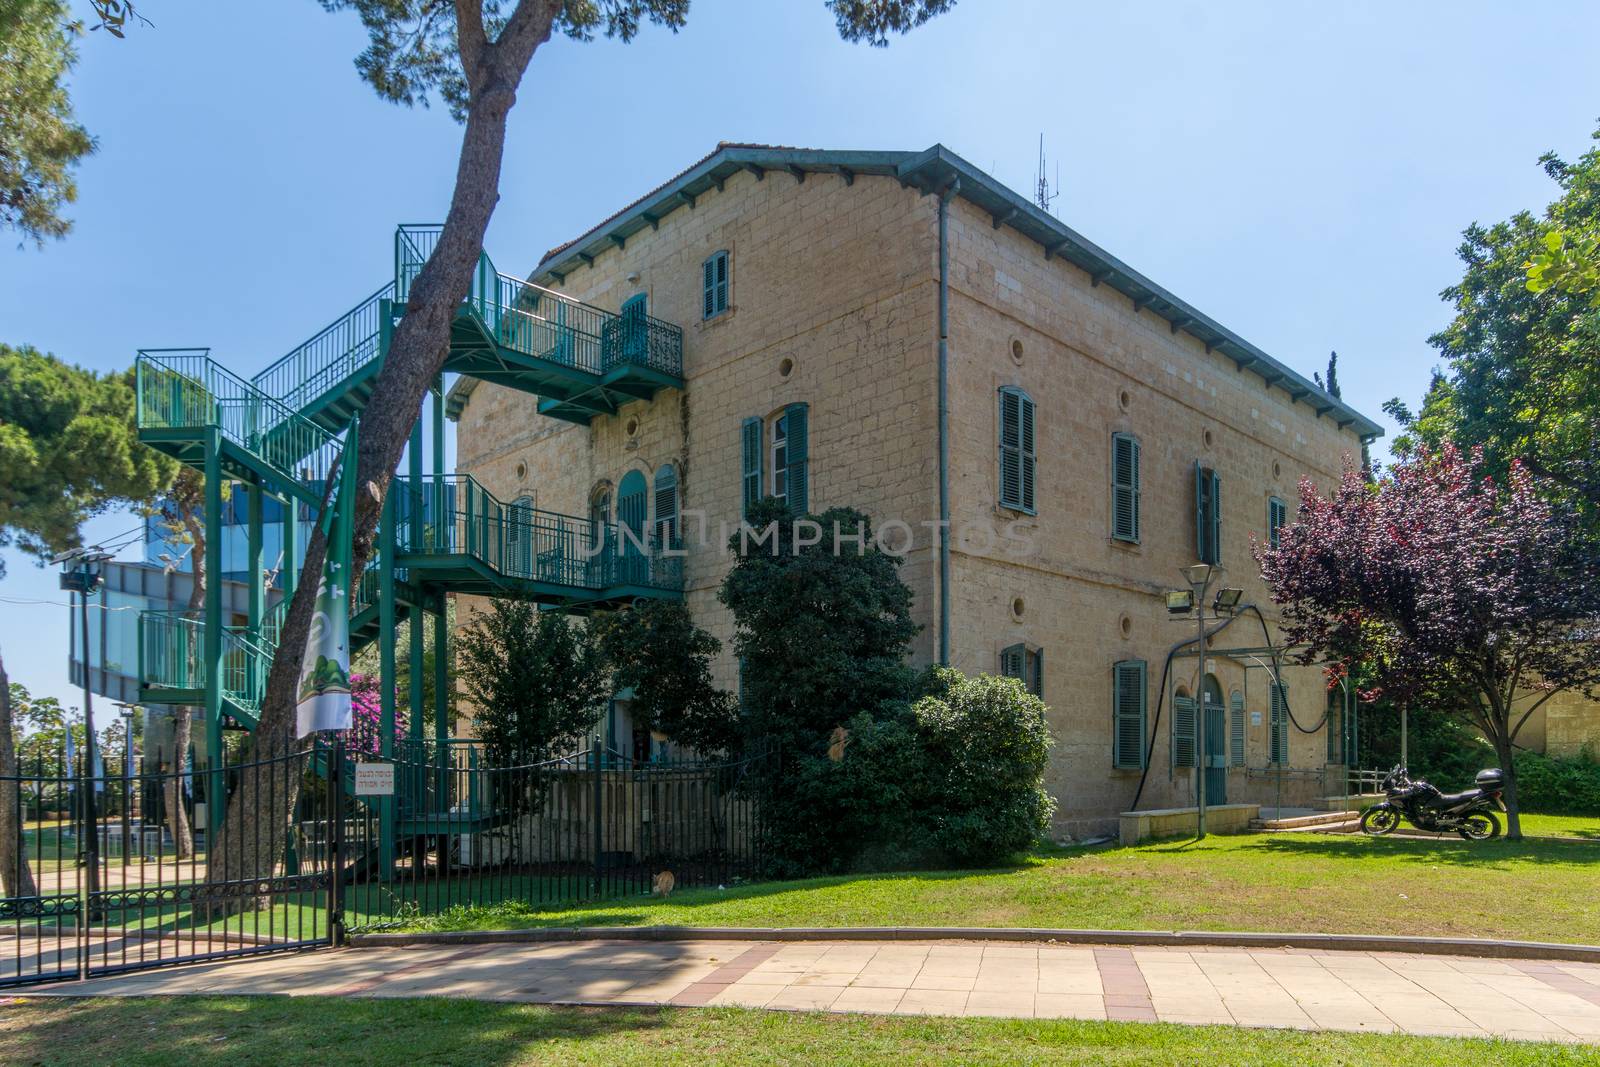 HAIFA, ISRAEL - JUNE 15, 2018: The old Hecht House building (built in 1893 by the Templers), in Haifa, Israel